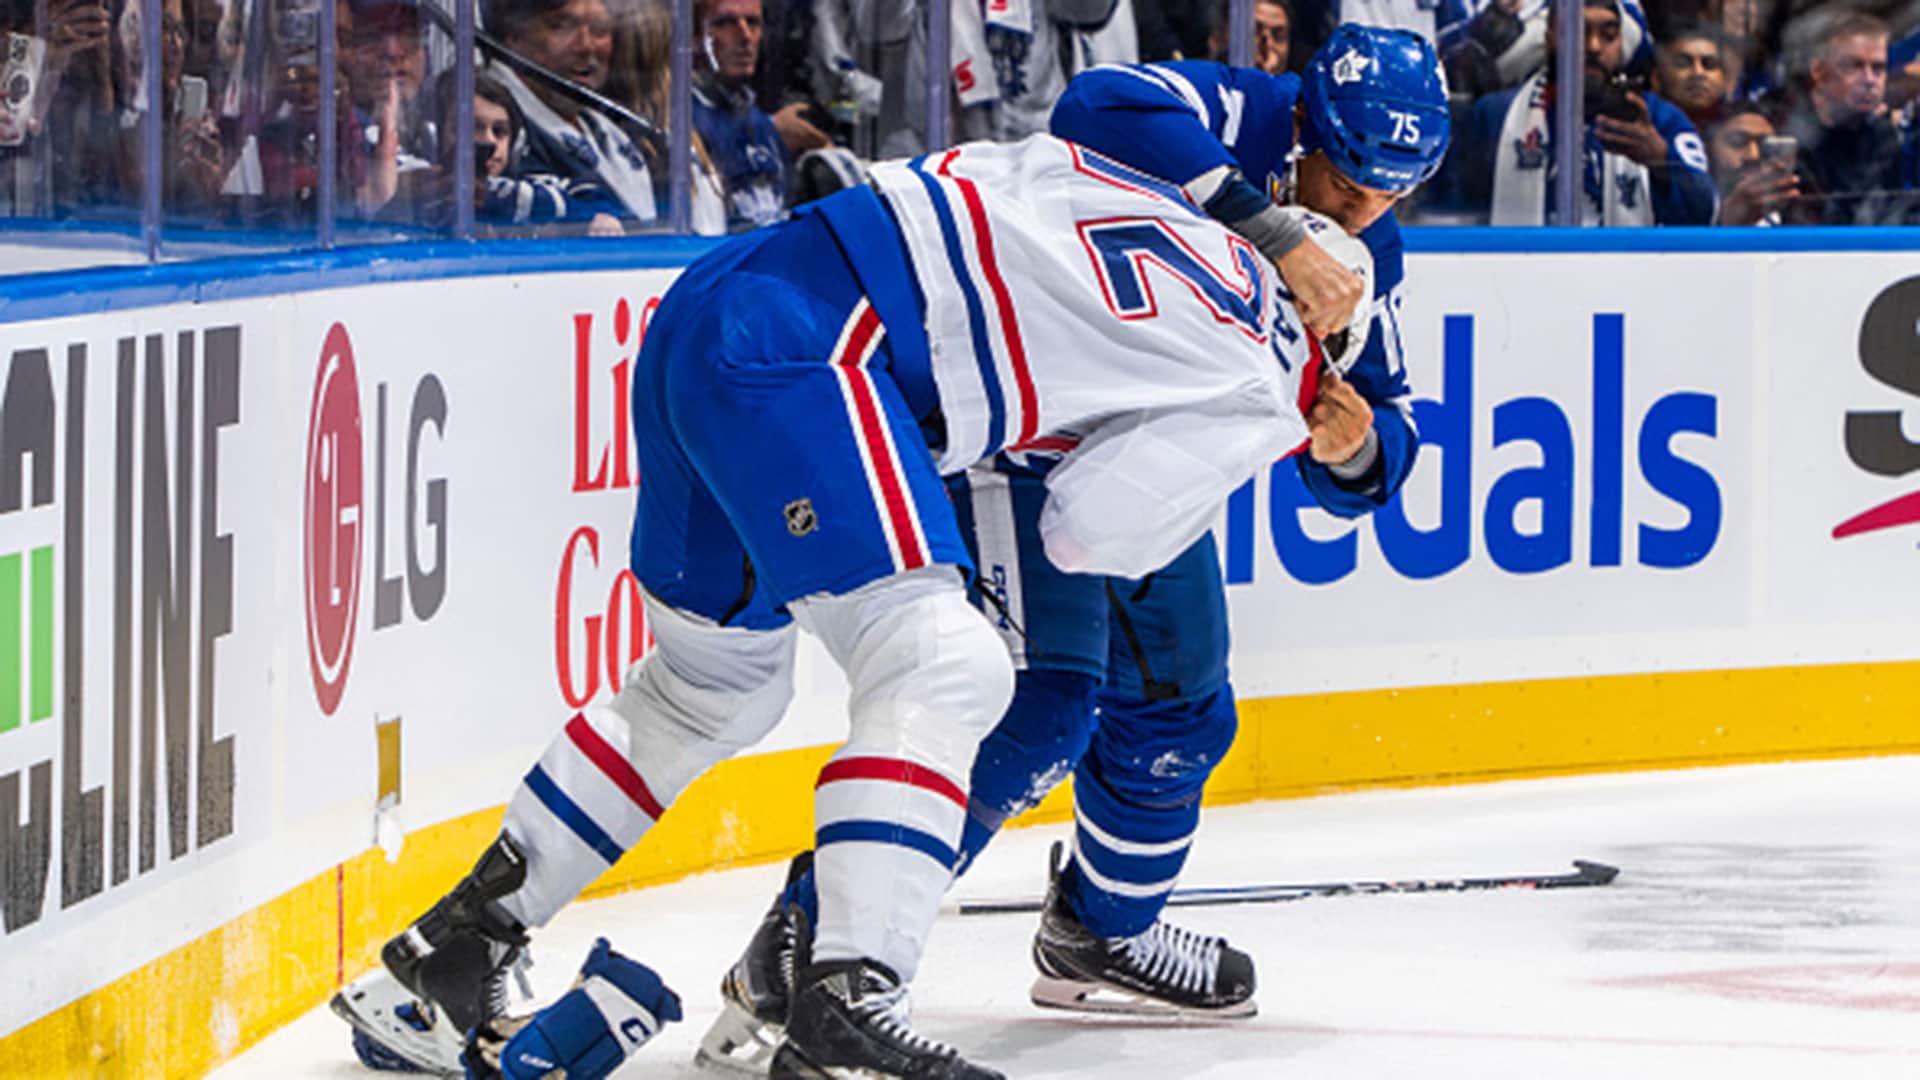 Don't like getting jumped” - Ryan Reaves takes a dig at Canadiens' Xhekaj,  seeks fight rematch